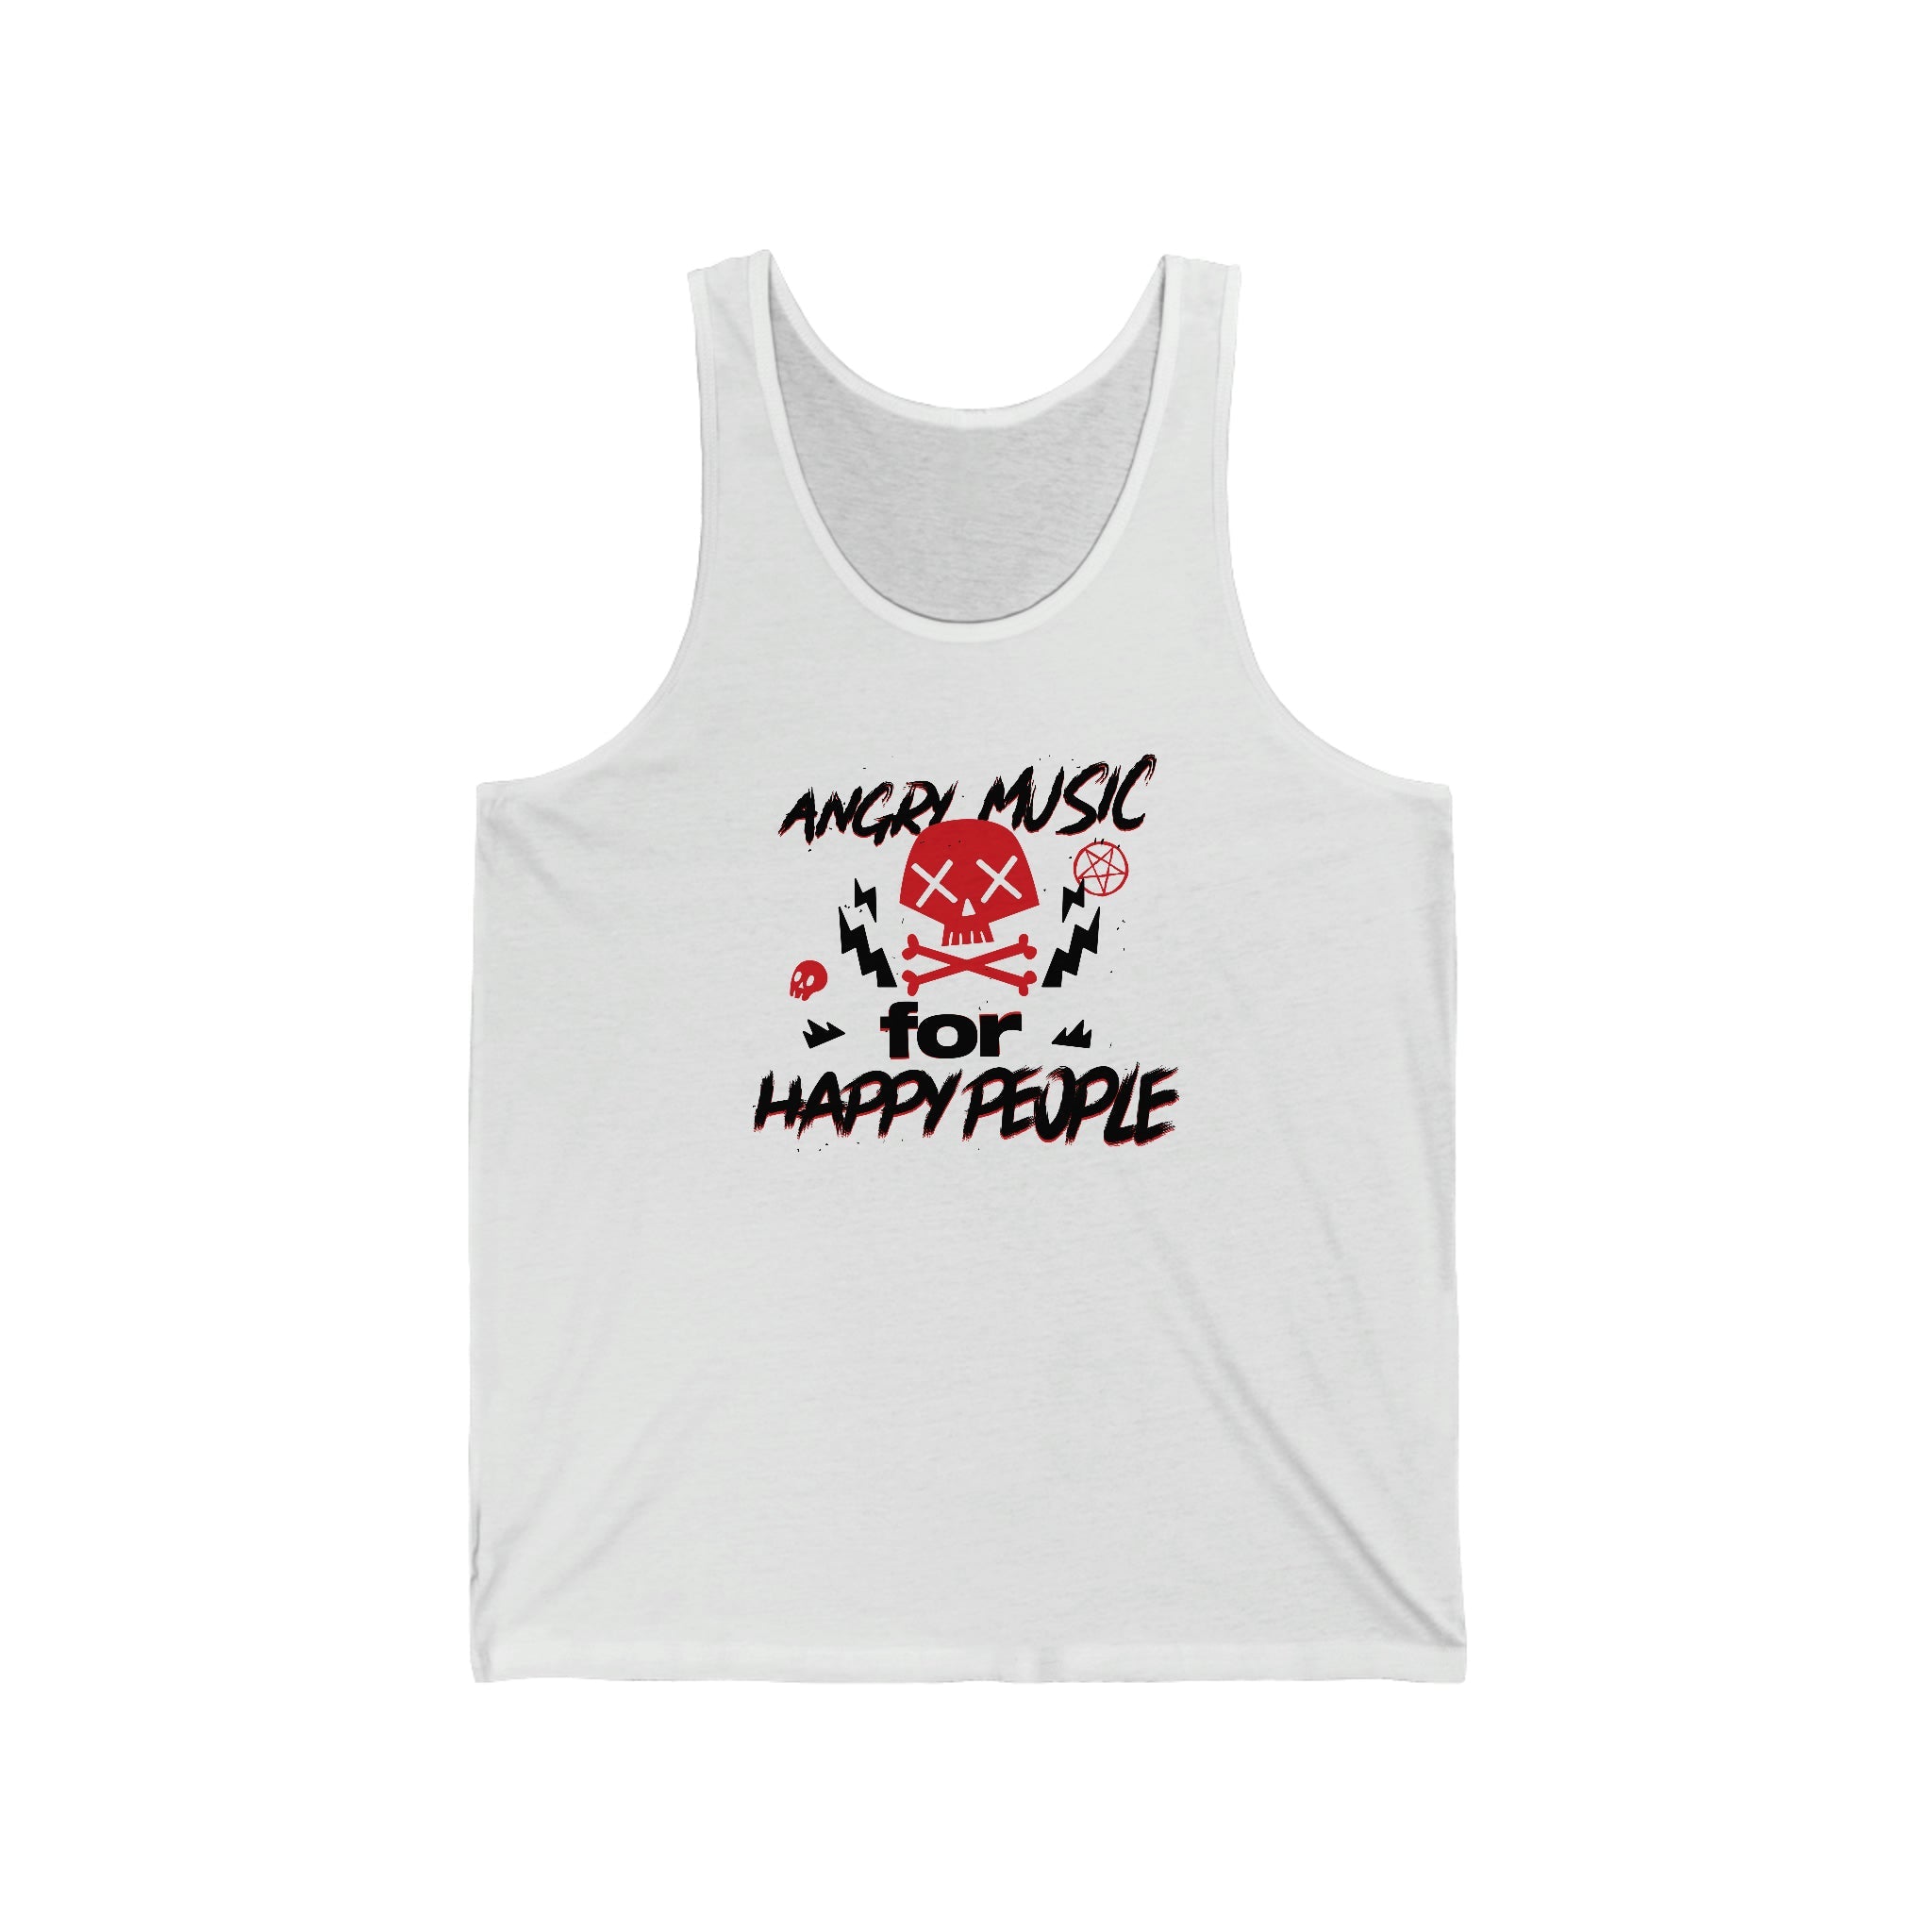 Angry Music for Happy People : Unisex 100% Cotton Tank